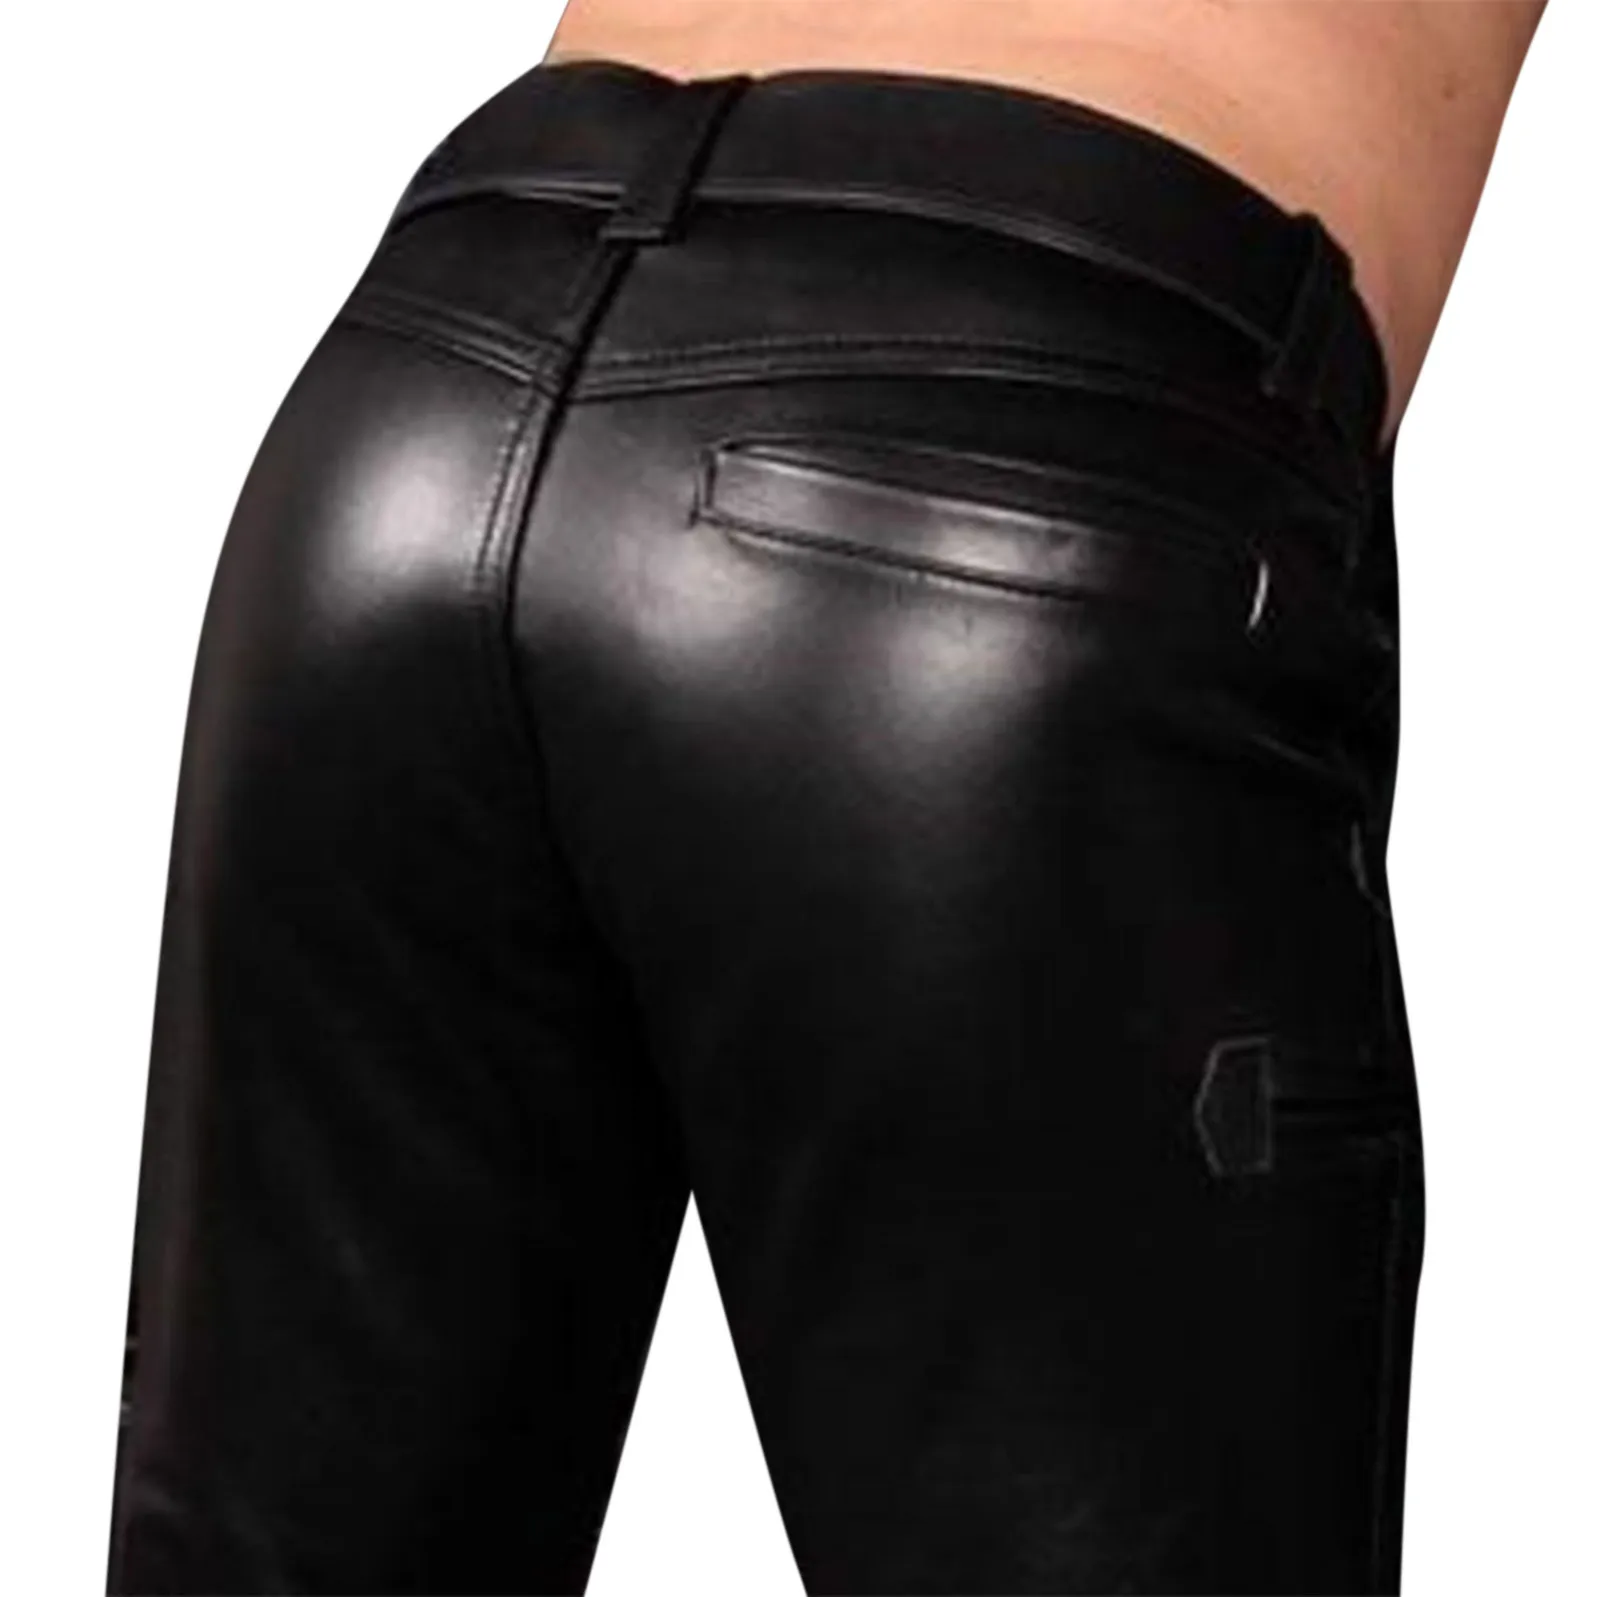 Men's Fashion Casual Pants Large Size Zipper Leather Pants Skinny Leather Pants Streetwear Motorcycle Male Trousers fruit of the loom sweatpants